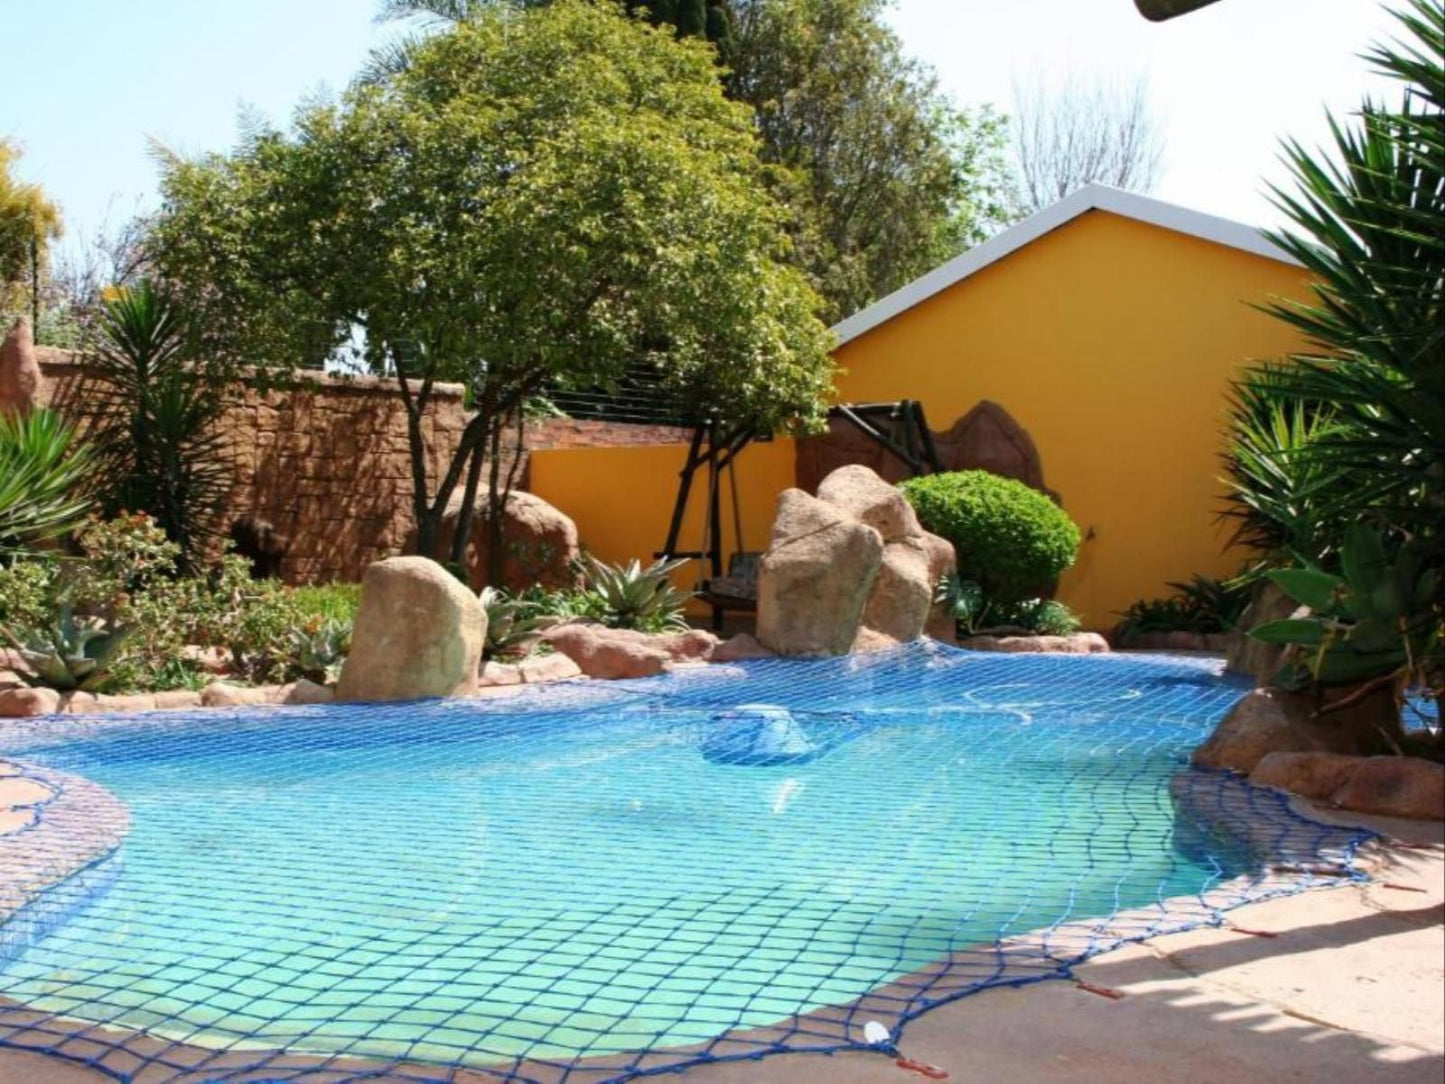 Flintstones Guest House Fourways Fourways Johannesburg Gauteng South Africa Complementary Colors, Garden, Nature, Plant, Swimming Pool